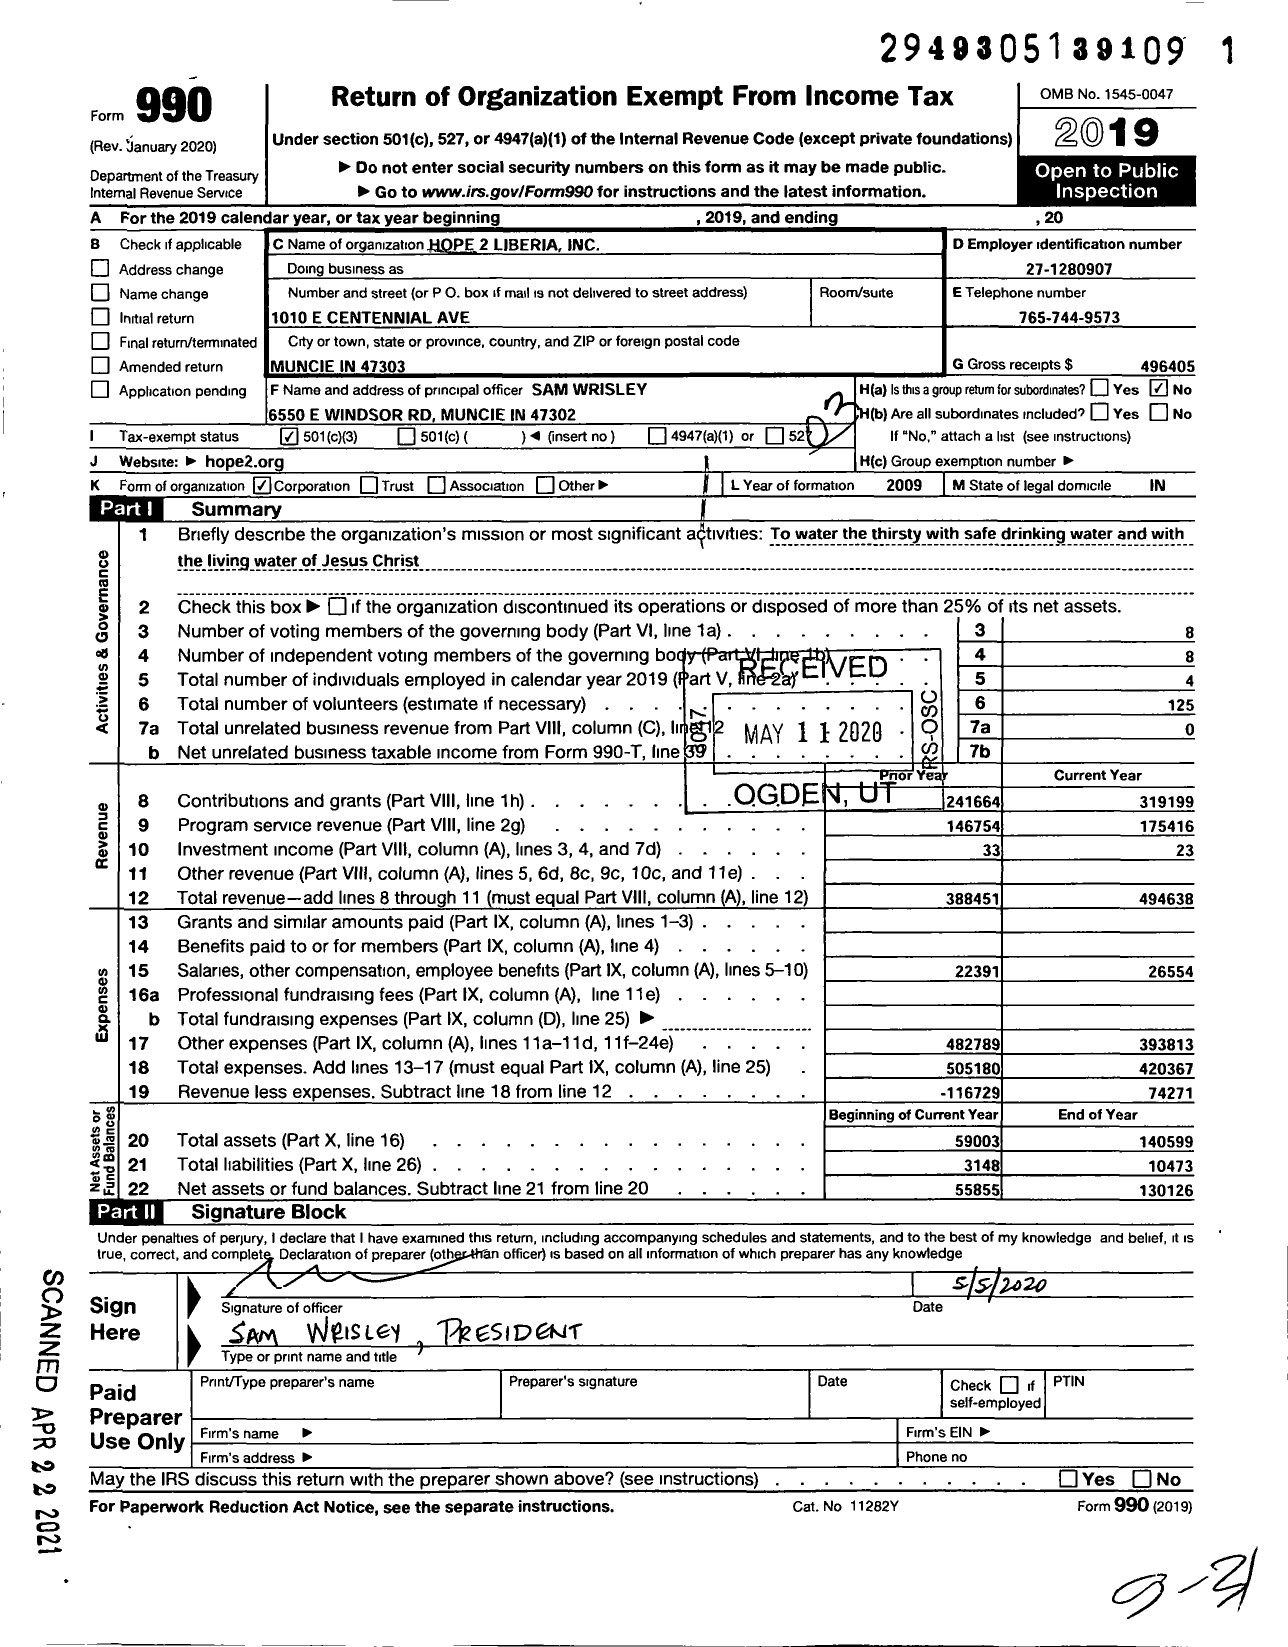 Image of first page of 2019 Form 990 for Hope 2 Liberia